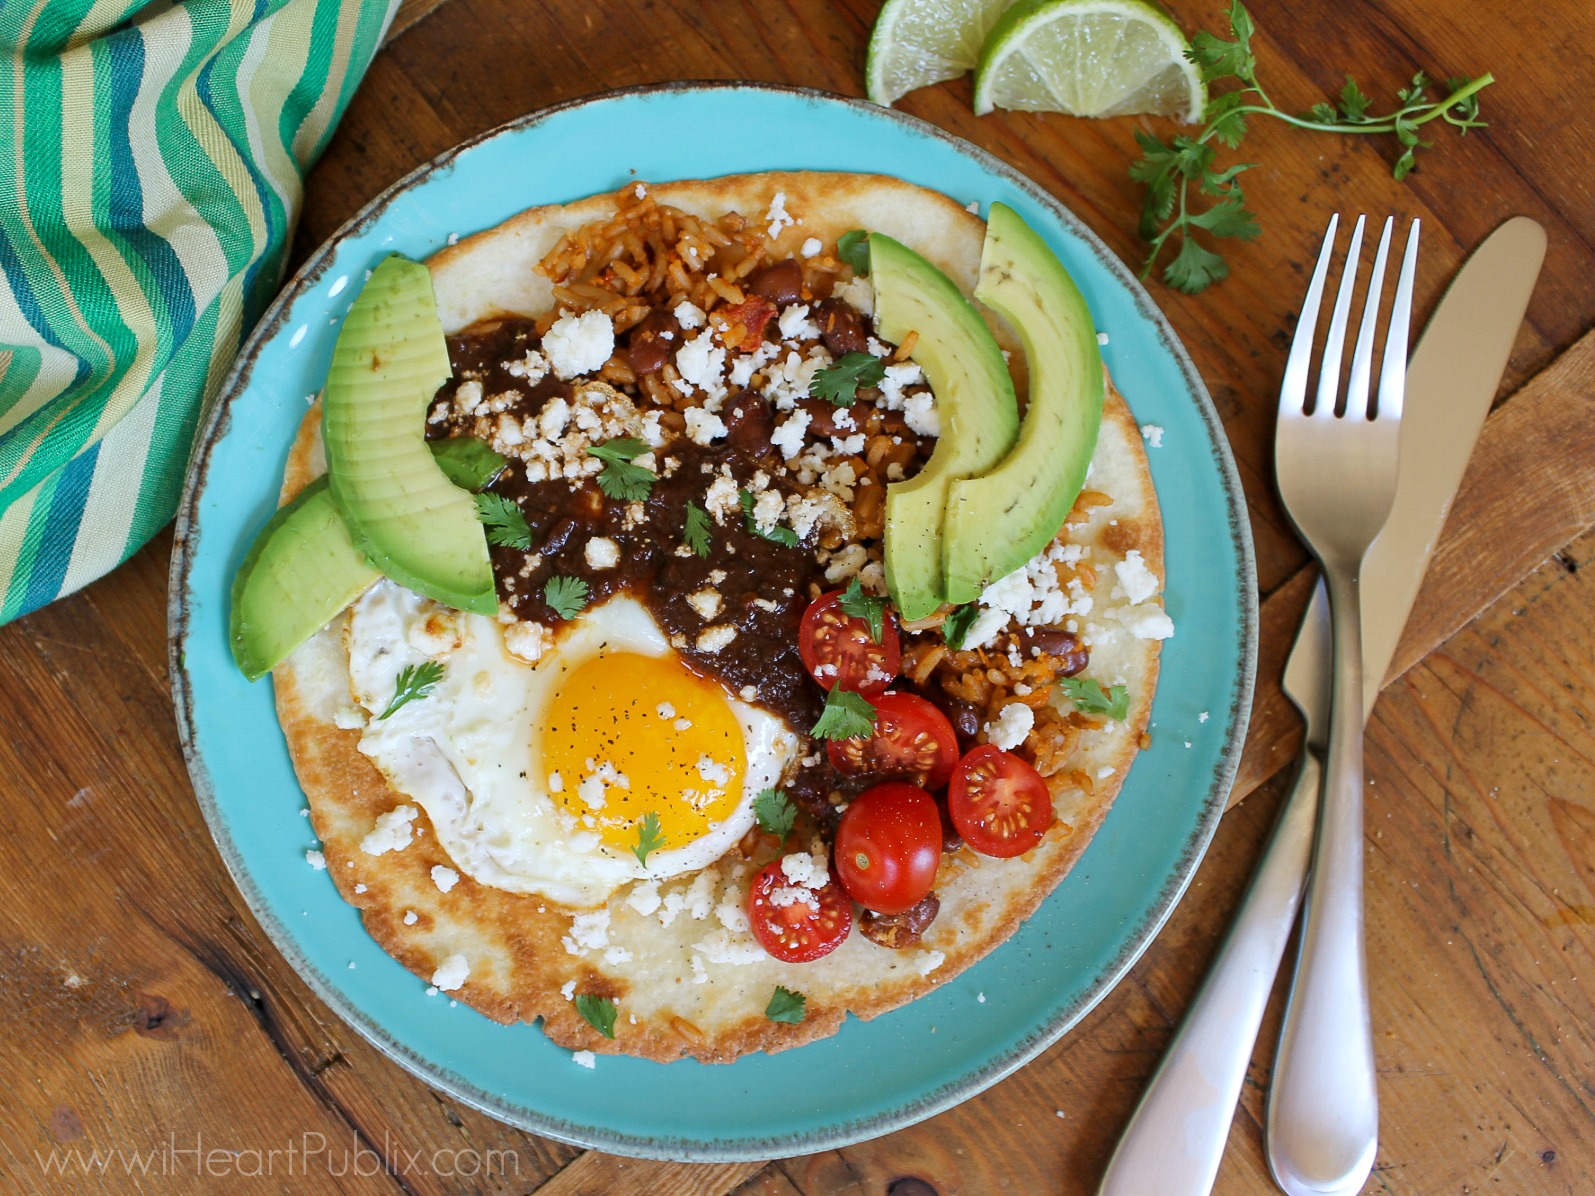 Huevos Rancheros With Pintos & Rice – Fantastic Recipe To Go With NEW Minute Ready To Serve